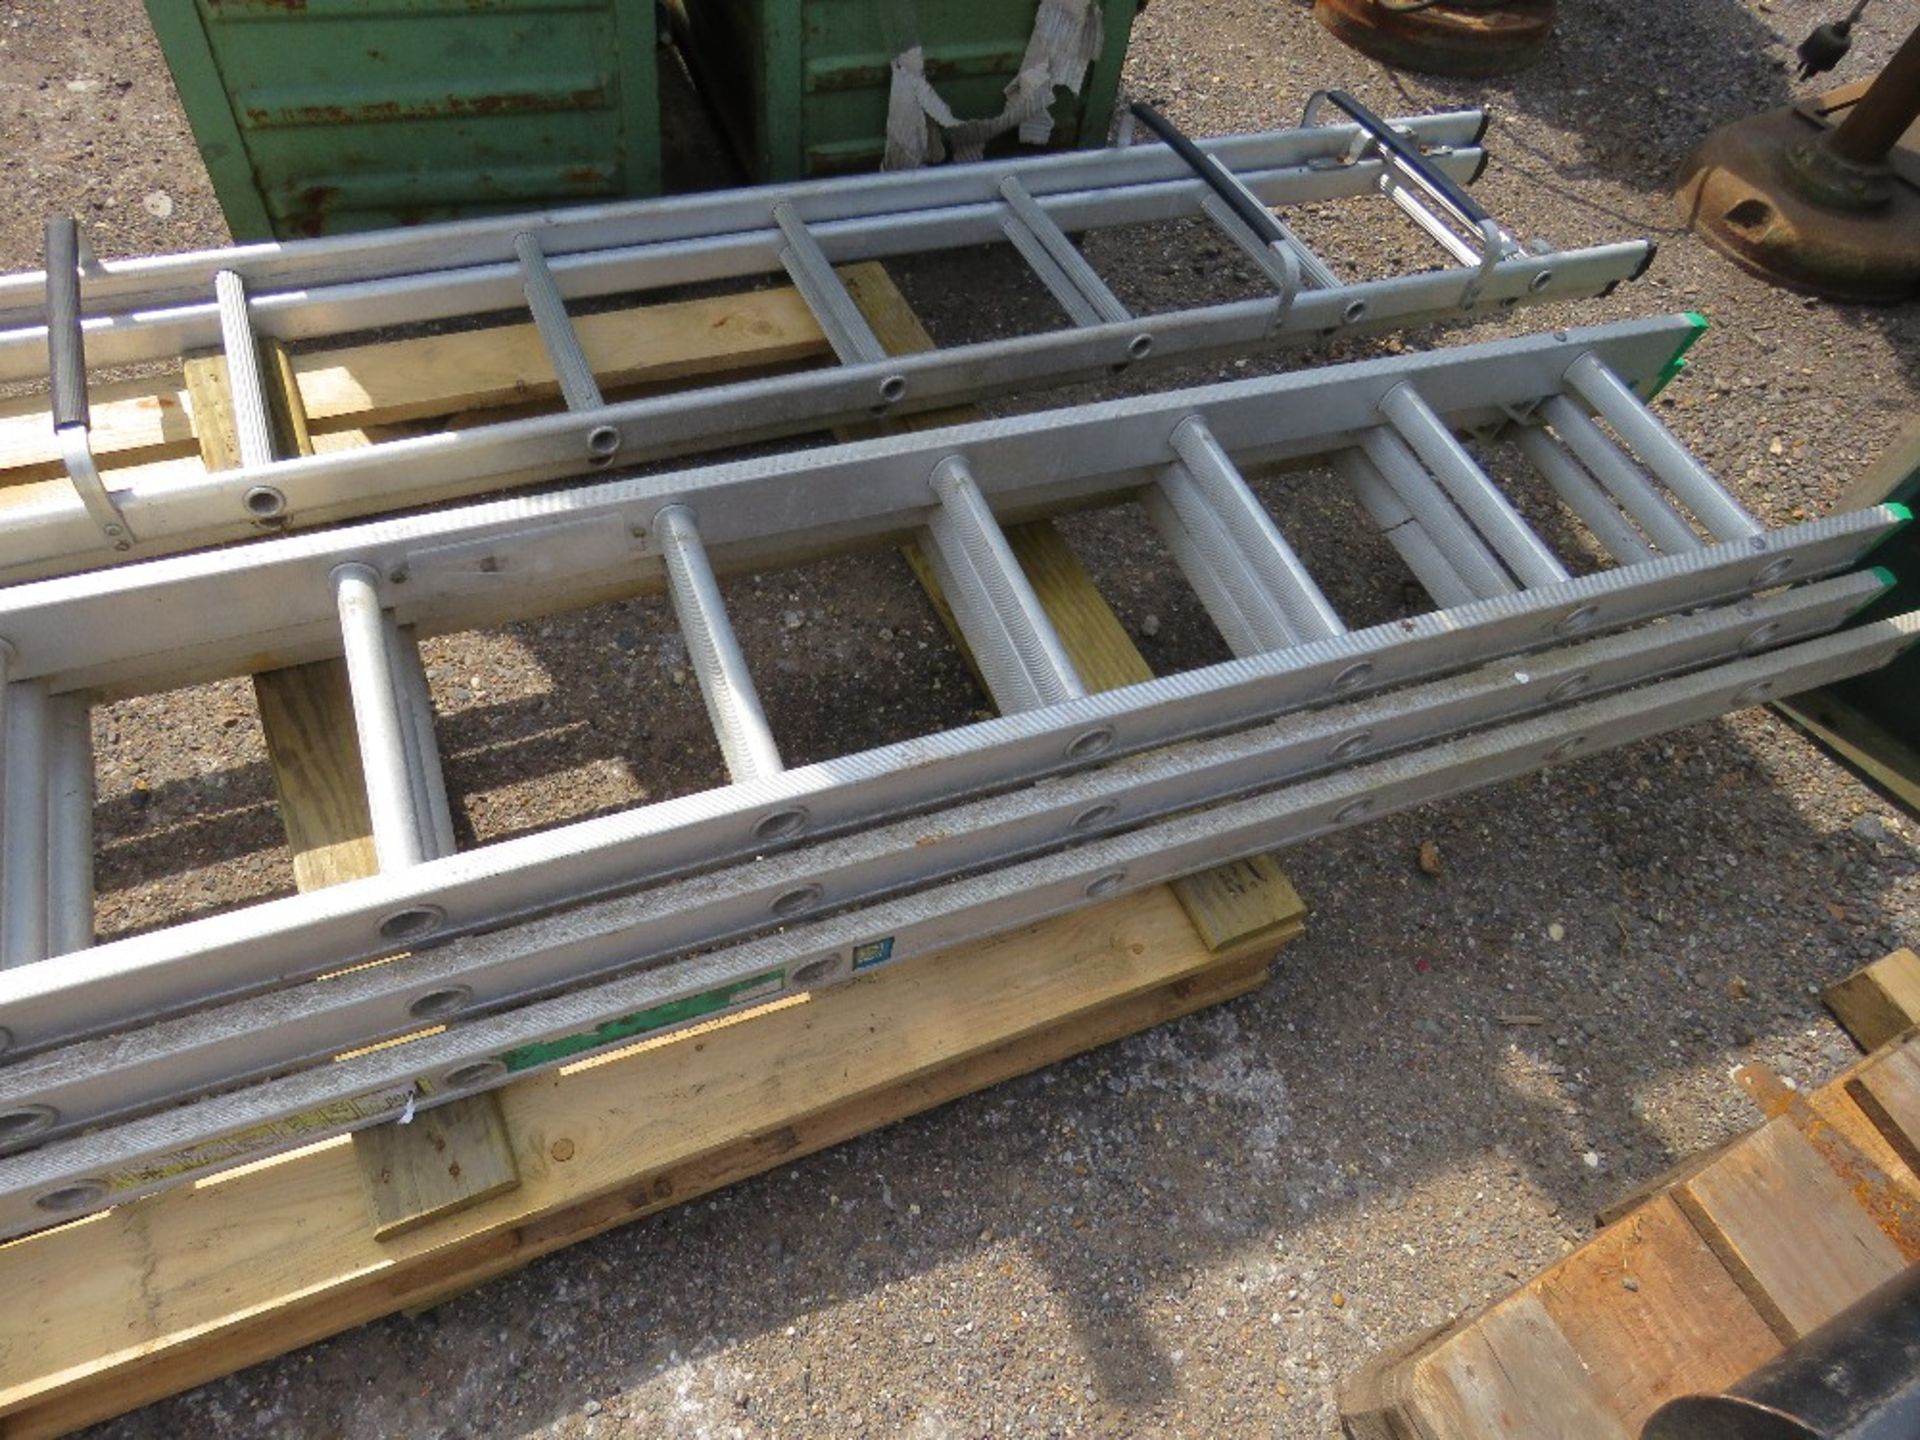 3 STAGE ALUMINIUM LADDER, 10FT CLOSED LENGTH APPROX. - Image 2 of 3